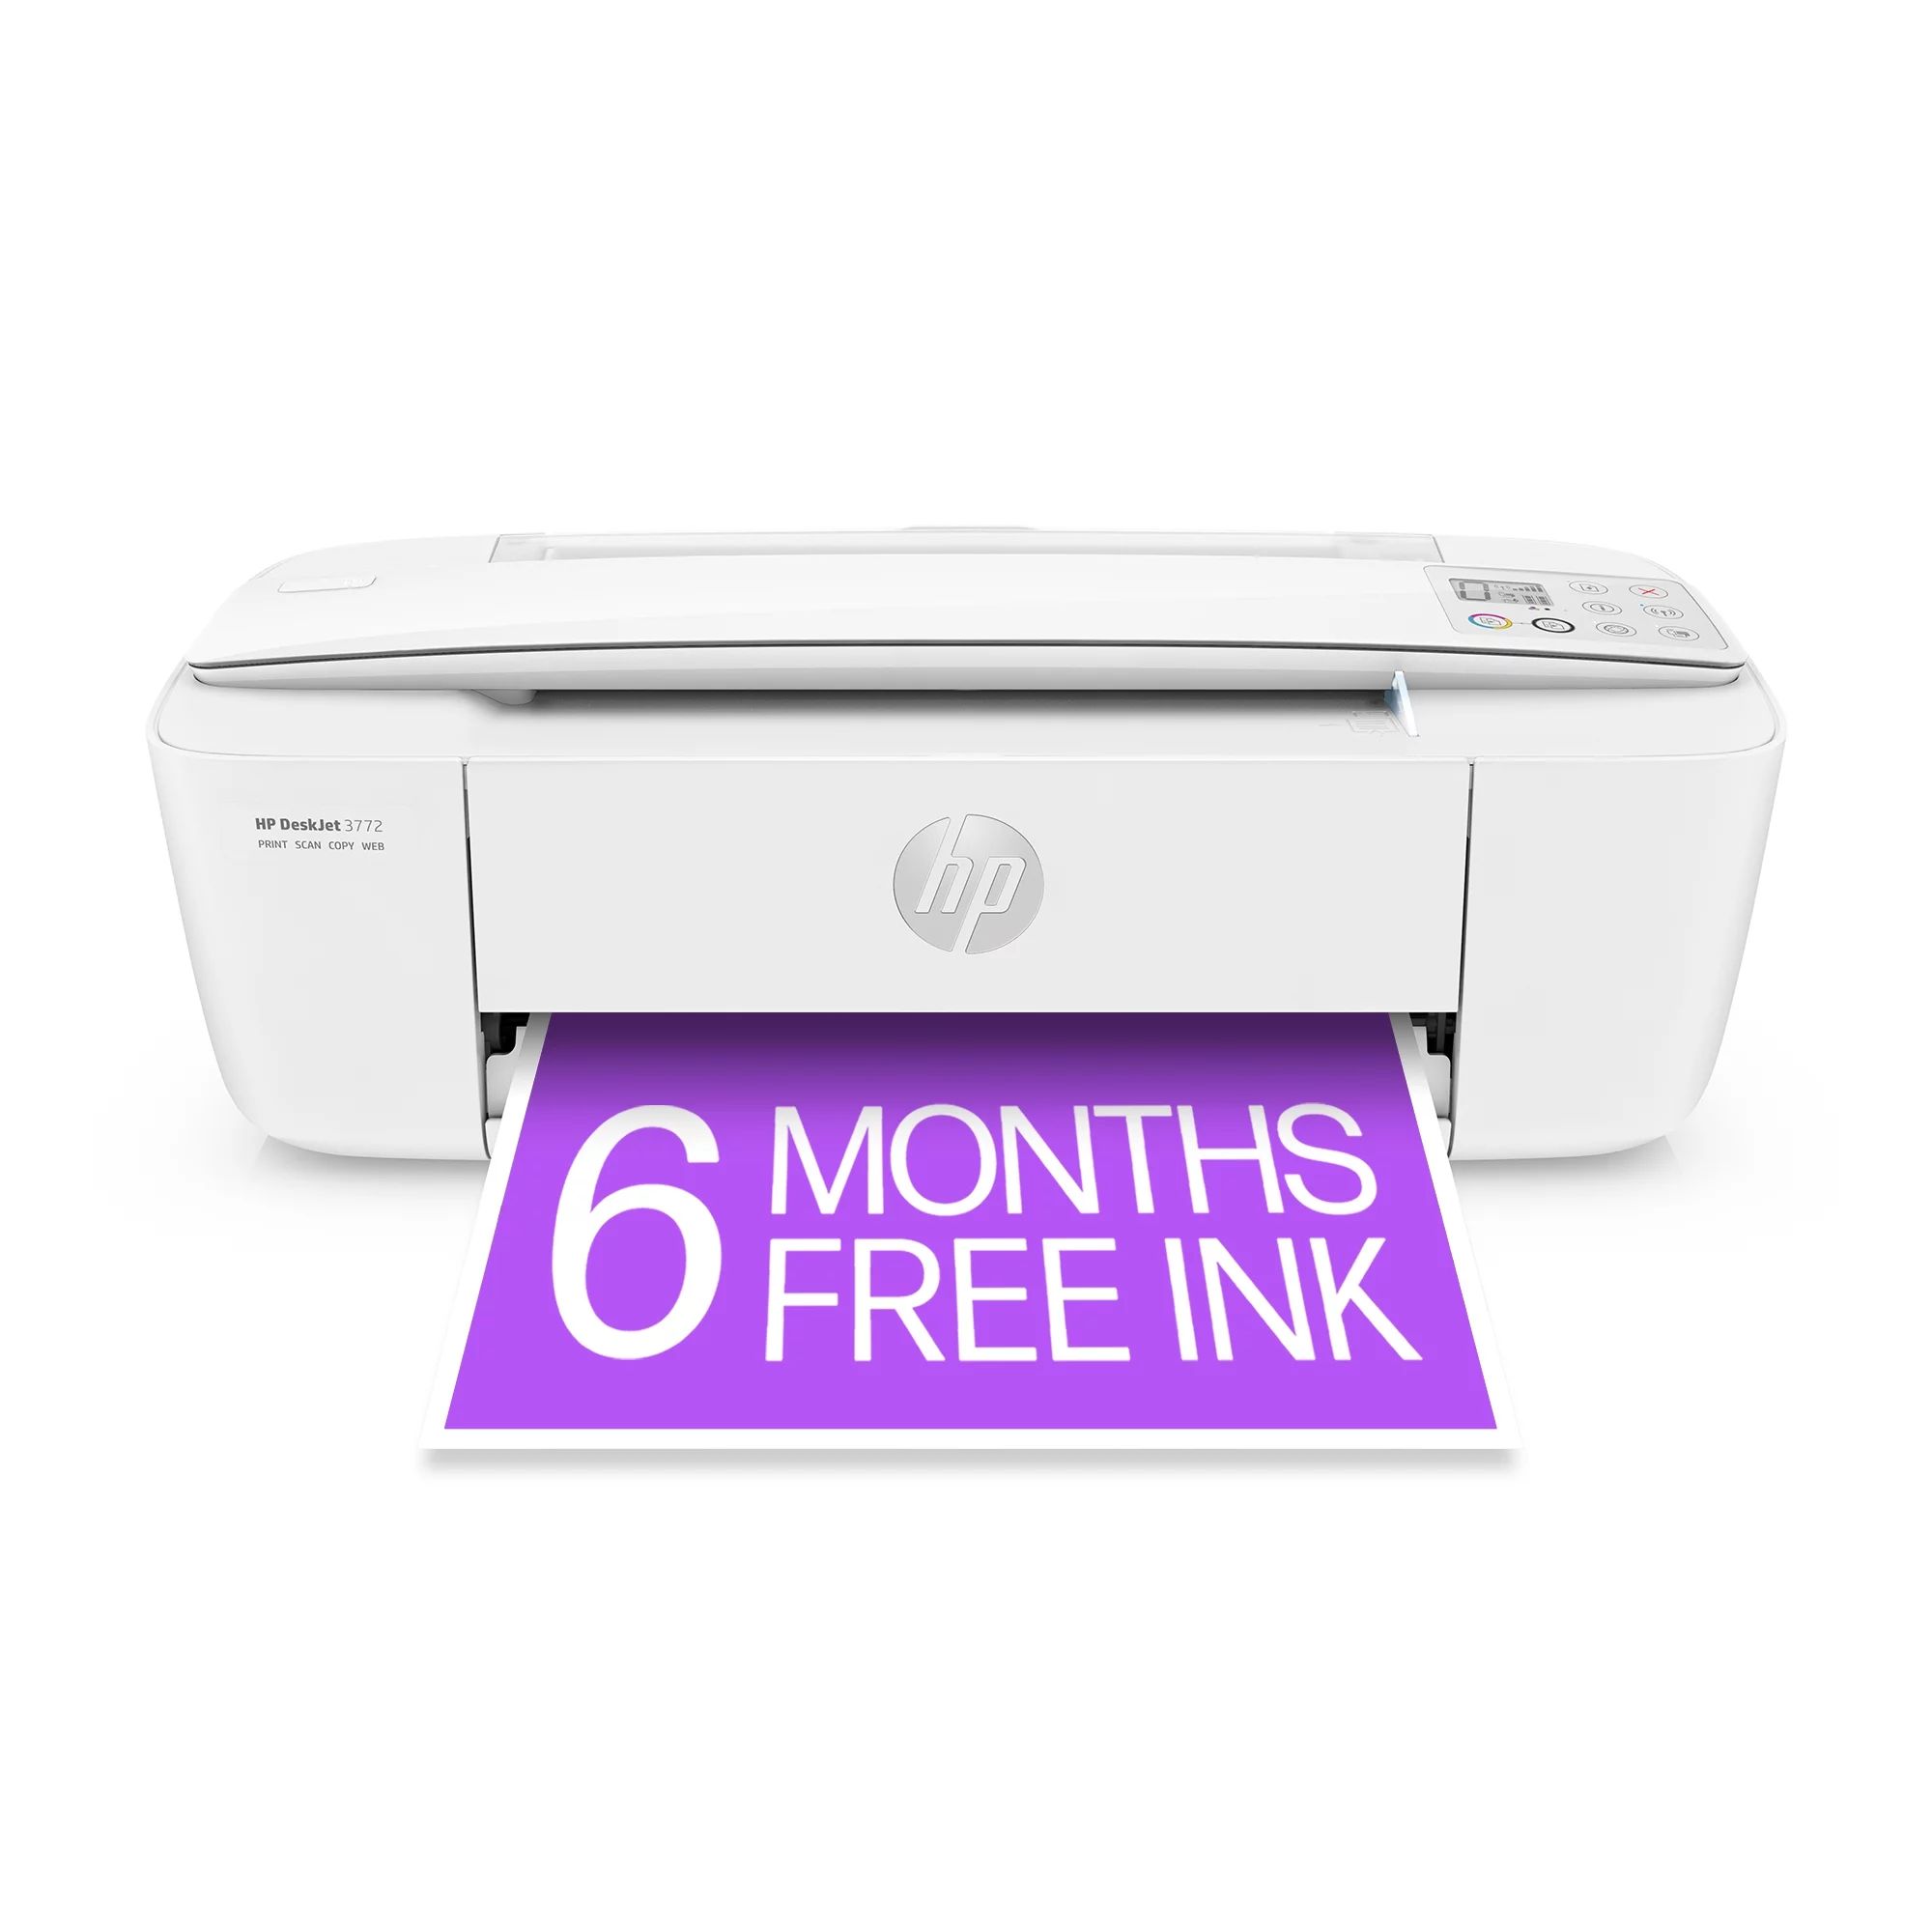 HP DeskJet 3772 All-in-One Wireless Color Inkjet Printer, 6 Months FREE ink with HP Instant Ink | Walmart (US)